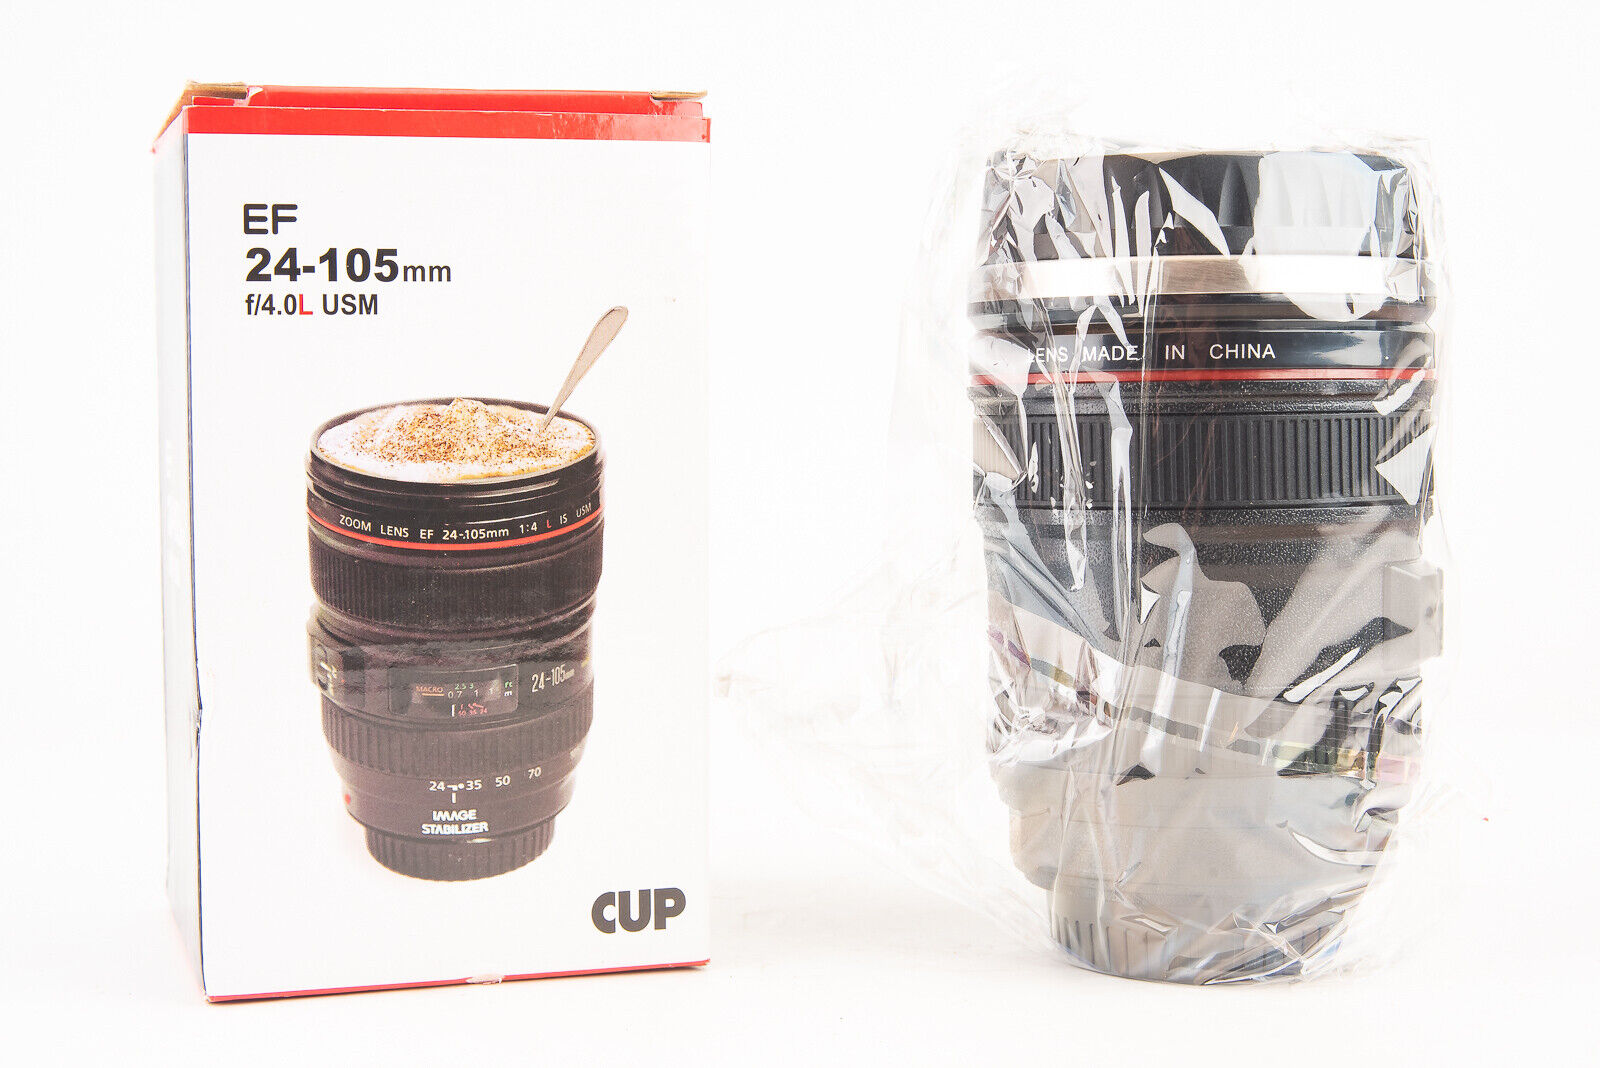 Canon EF 24-105mm f/4 L Lens Stainless Steel Thermo Coffee Cup/Mug NOS MINT V11